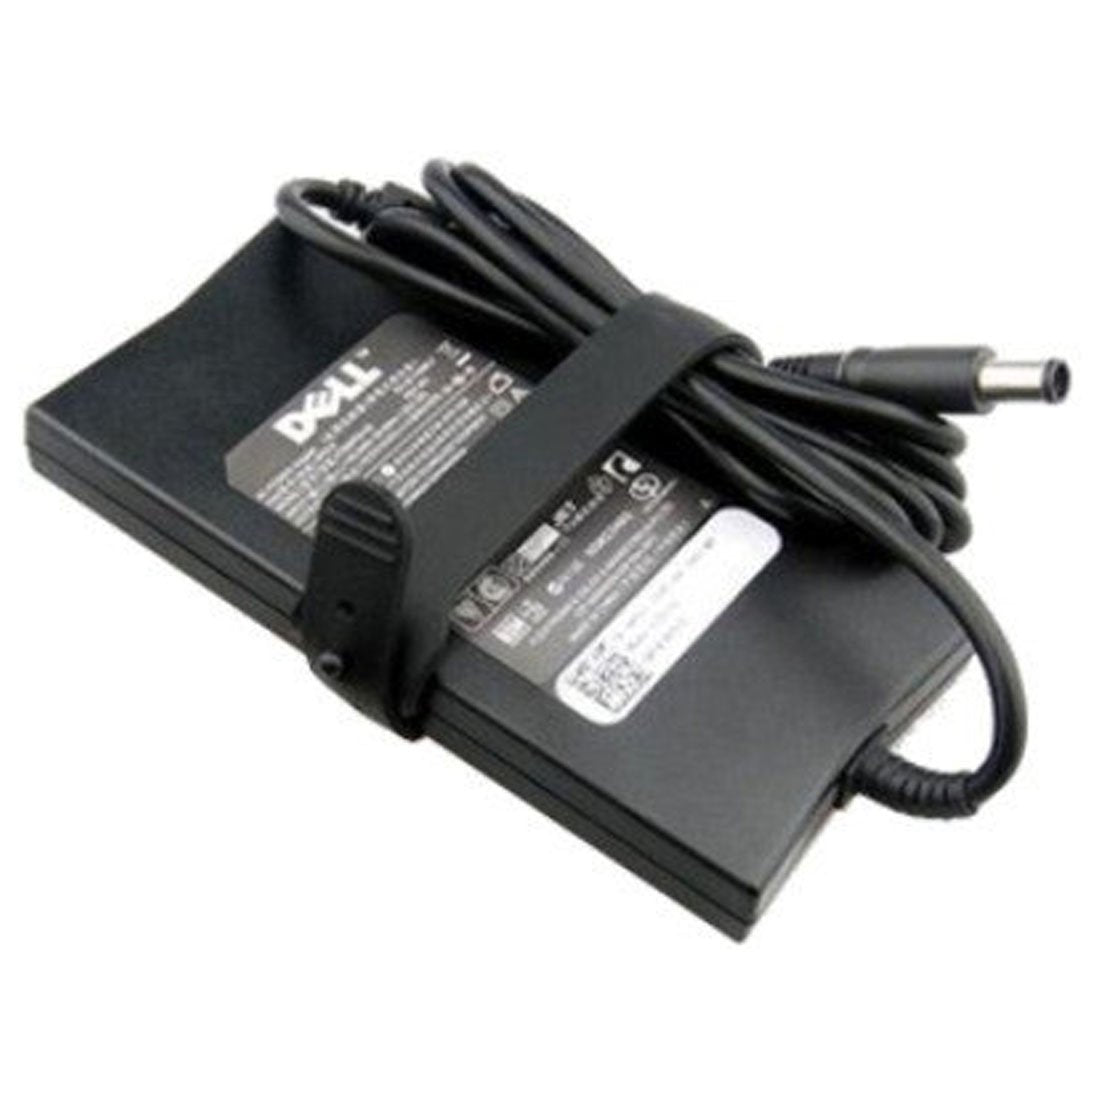 Dell Original 130W 19.5V 7.4mm Pin Laptop Charger Adapter for Inspiron 5755 With Power Cord